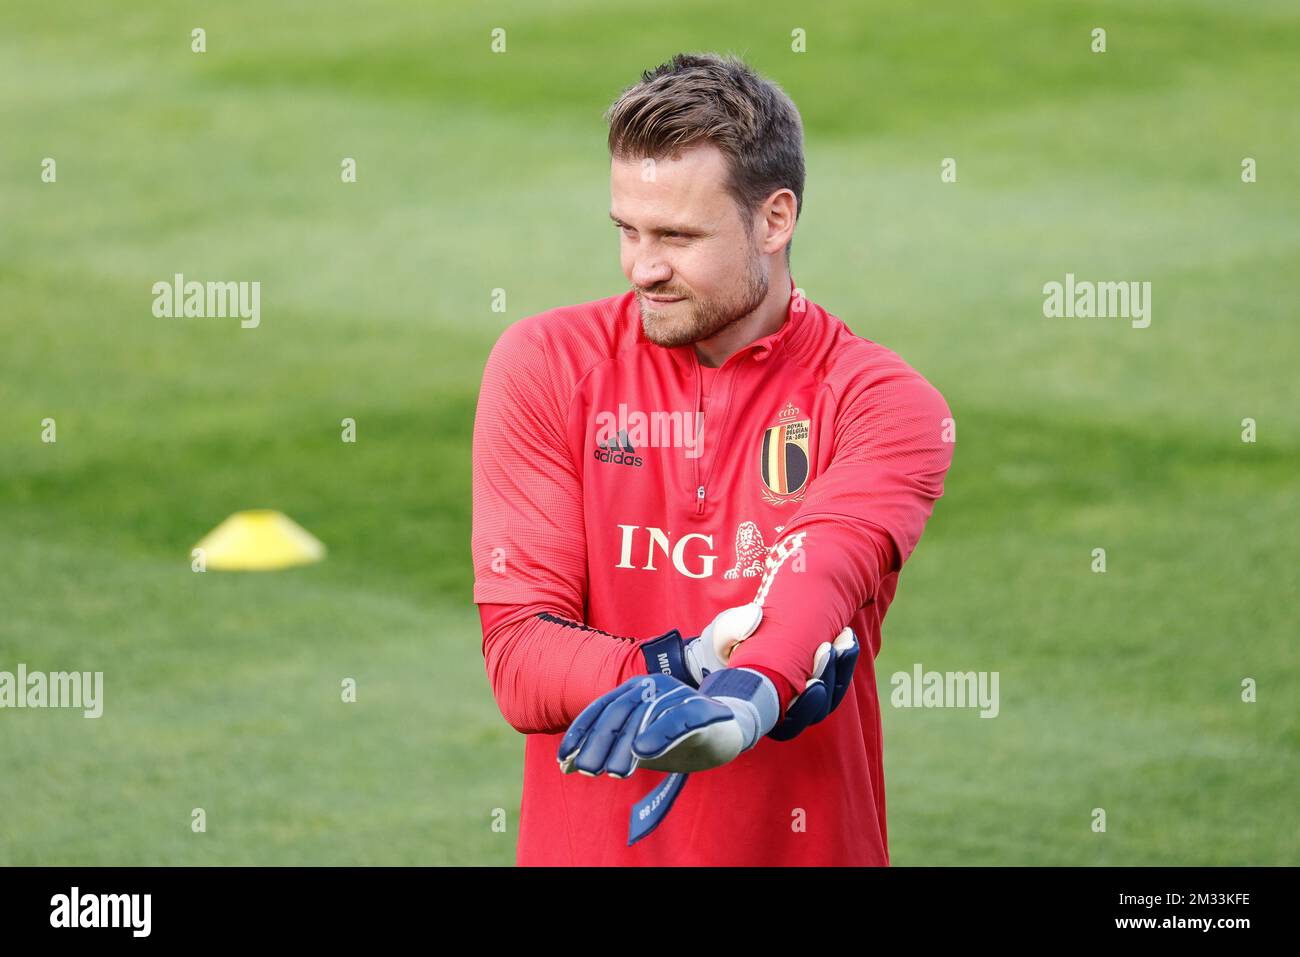 Belgium's goalkeeper Simon Mignolet pictured during a training session of the Belgian national soccer team Red Devils, part of the preparations for the upcoming games, Wednesday 07 October 2020 in Tubize. Tomorrow the team will meet Ivory Coast in a friendly fixture, later they'll be playing two European Cup 2020 qualification games against England and Iceland. BELGA PHOTO BRUNO FAHY Stock Photo